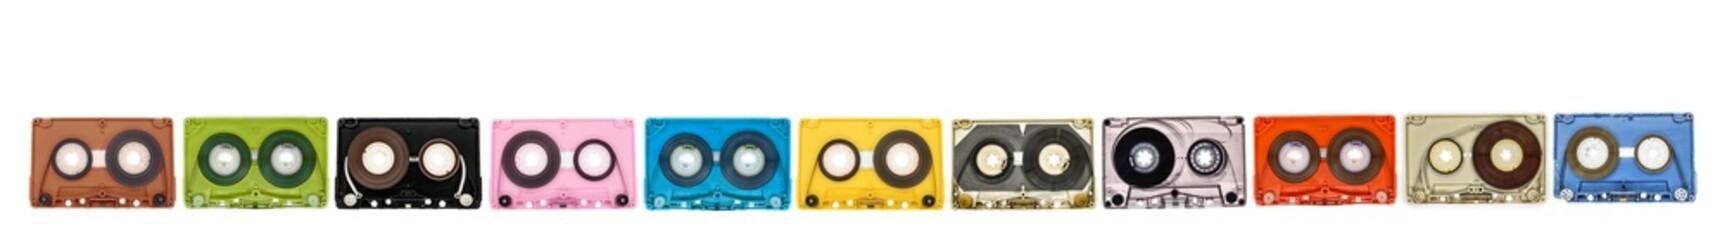 old audio cassette tape open in a row on white background, banner design with copy space